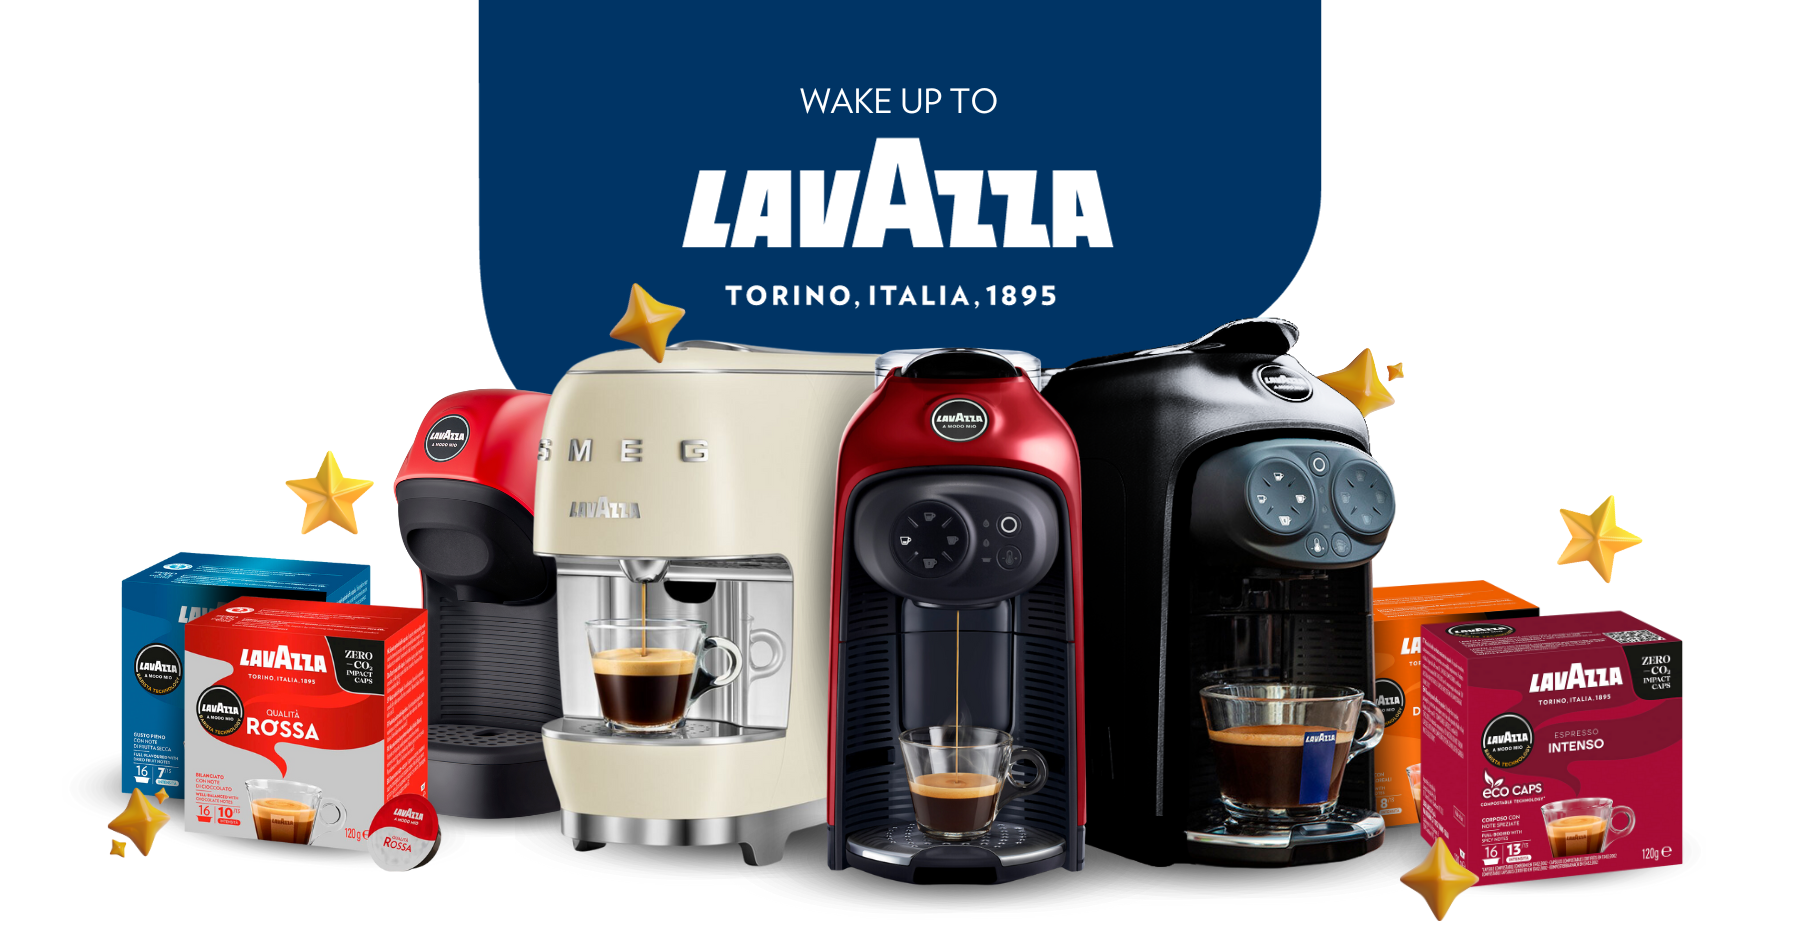 Wake up in style with a new Lavazza A Modo Mio SMEG  Wake up in style with  a new Lavazza A Modo Mio SMEG coffee machine. Head to our site and